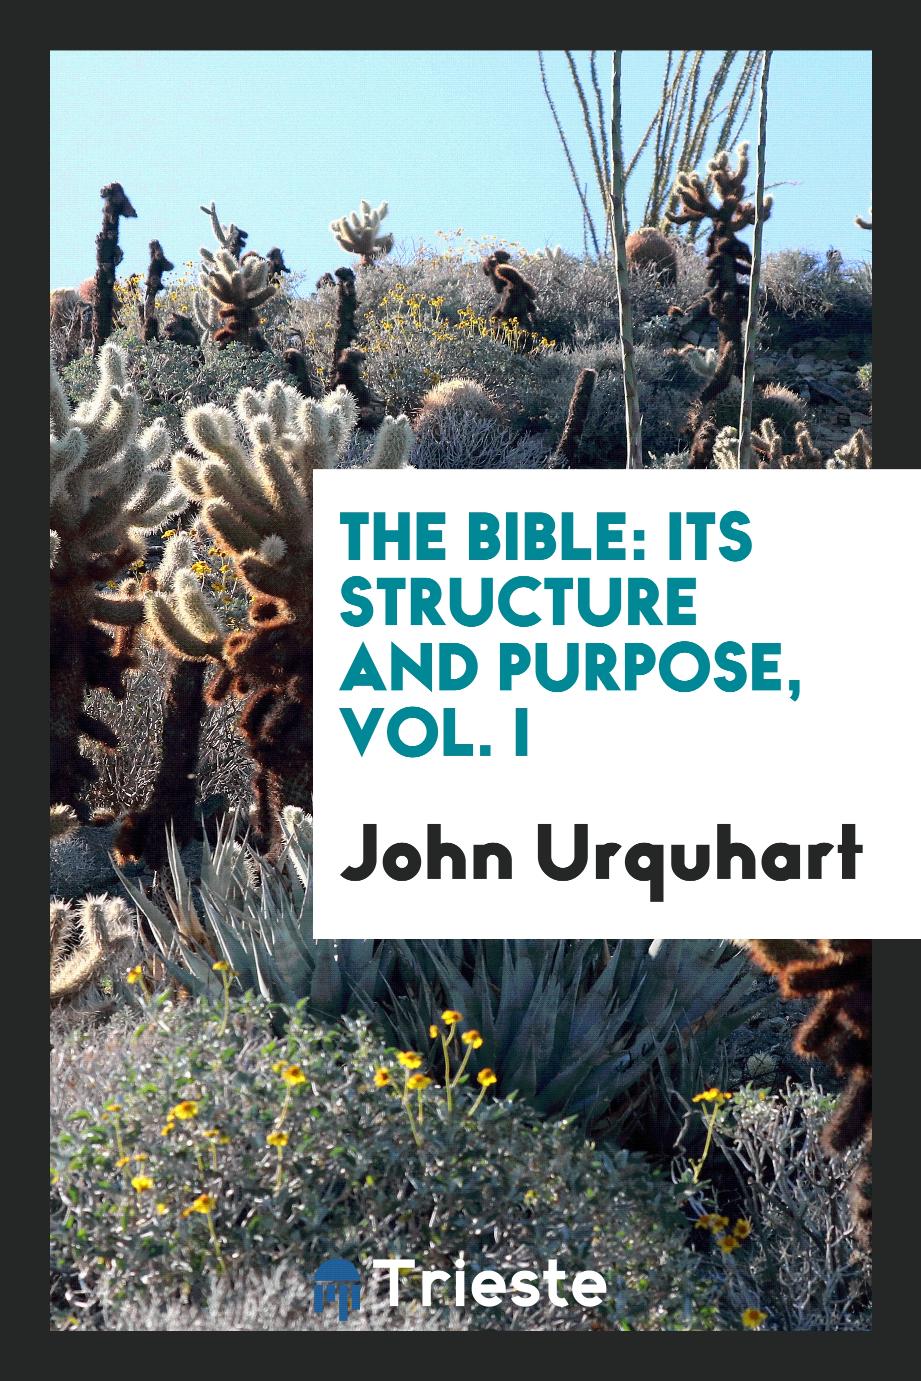 The Bible: its structure and purpose, Vol. I